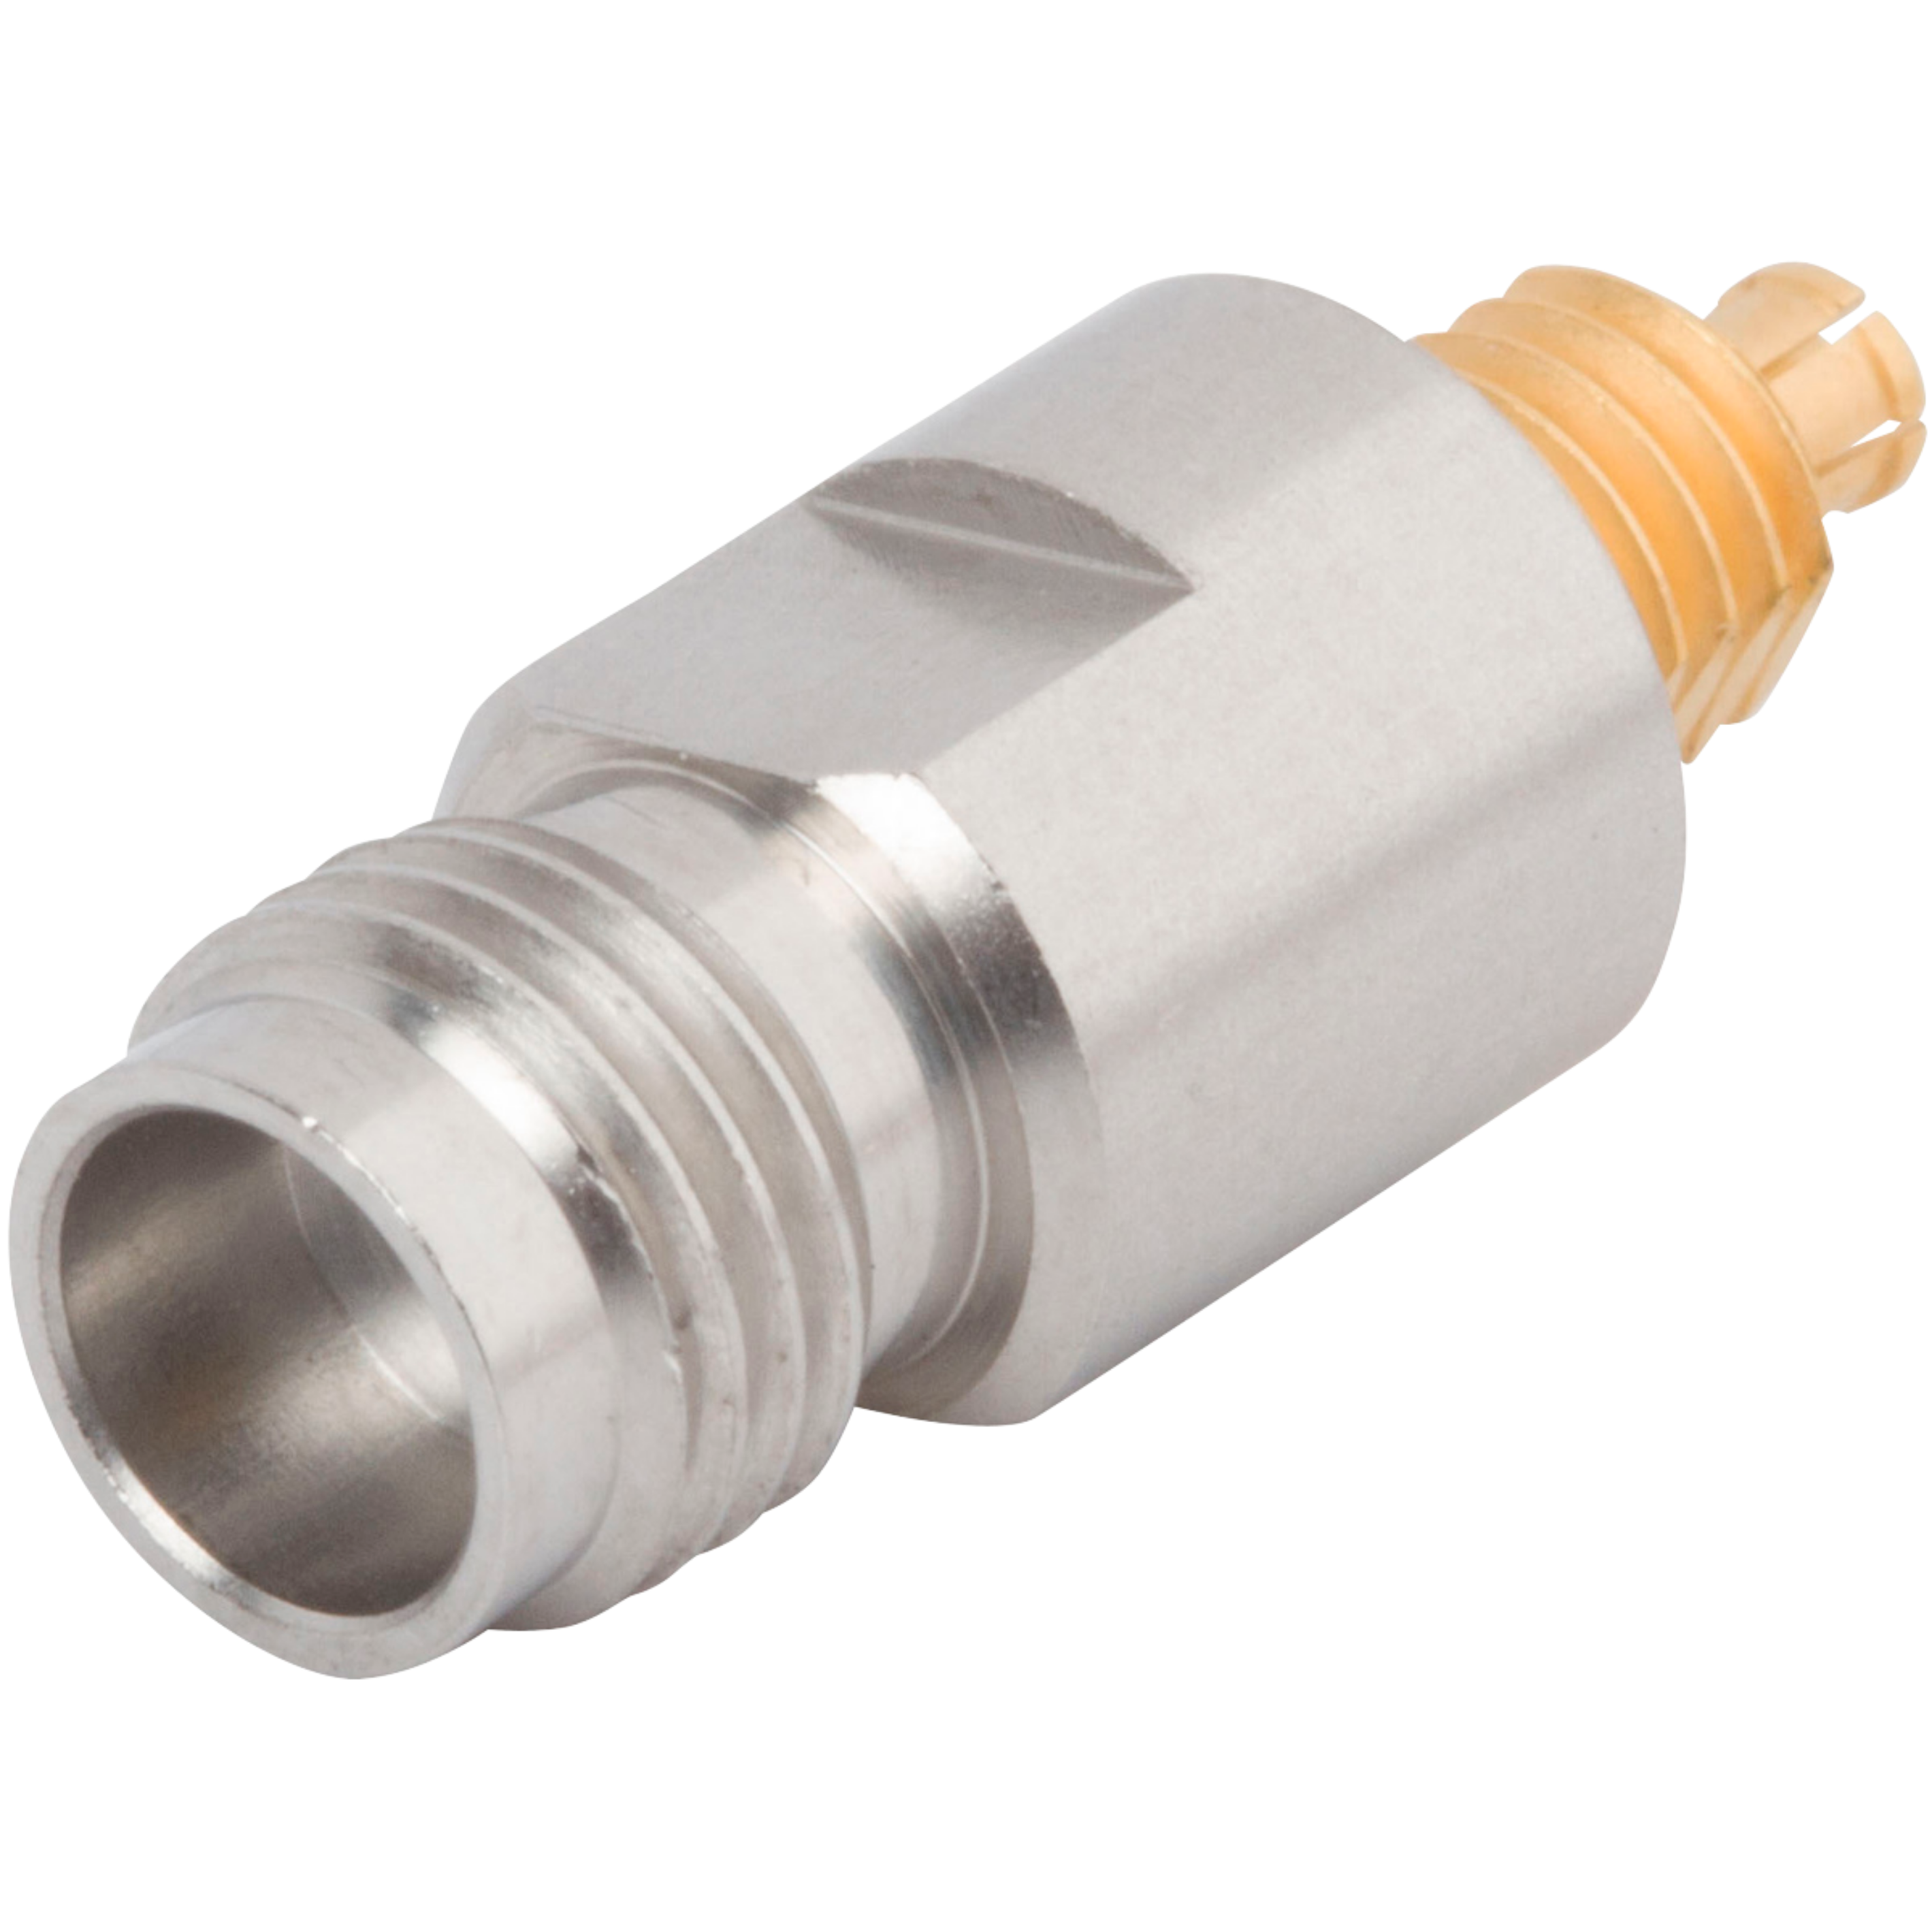 1.85mm Female to SMPM Thread-In Female Adapter, SF1133-6007